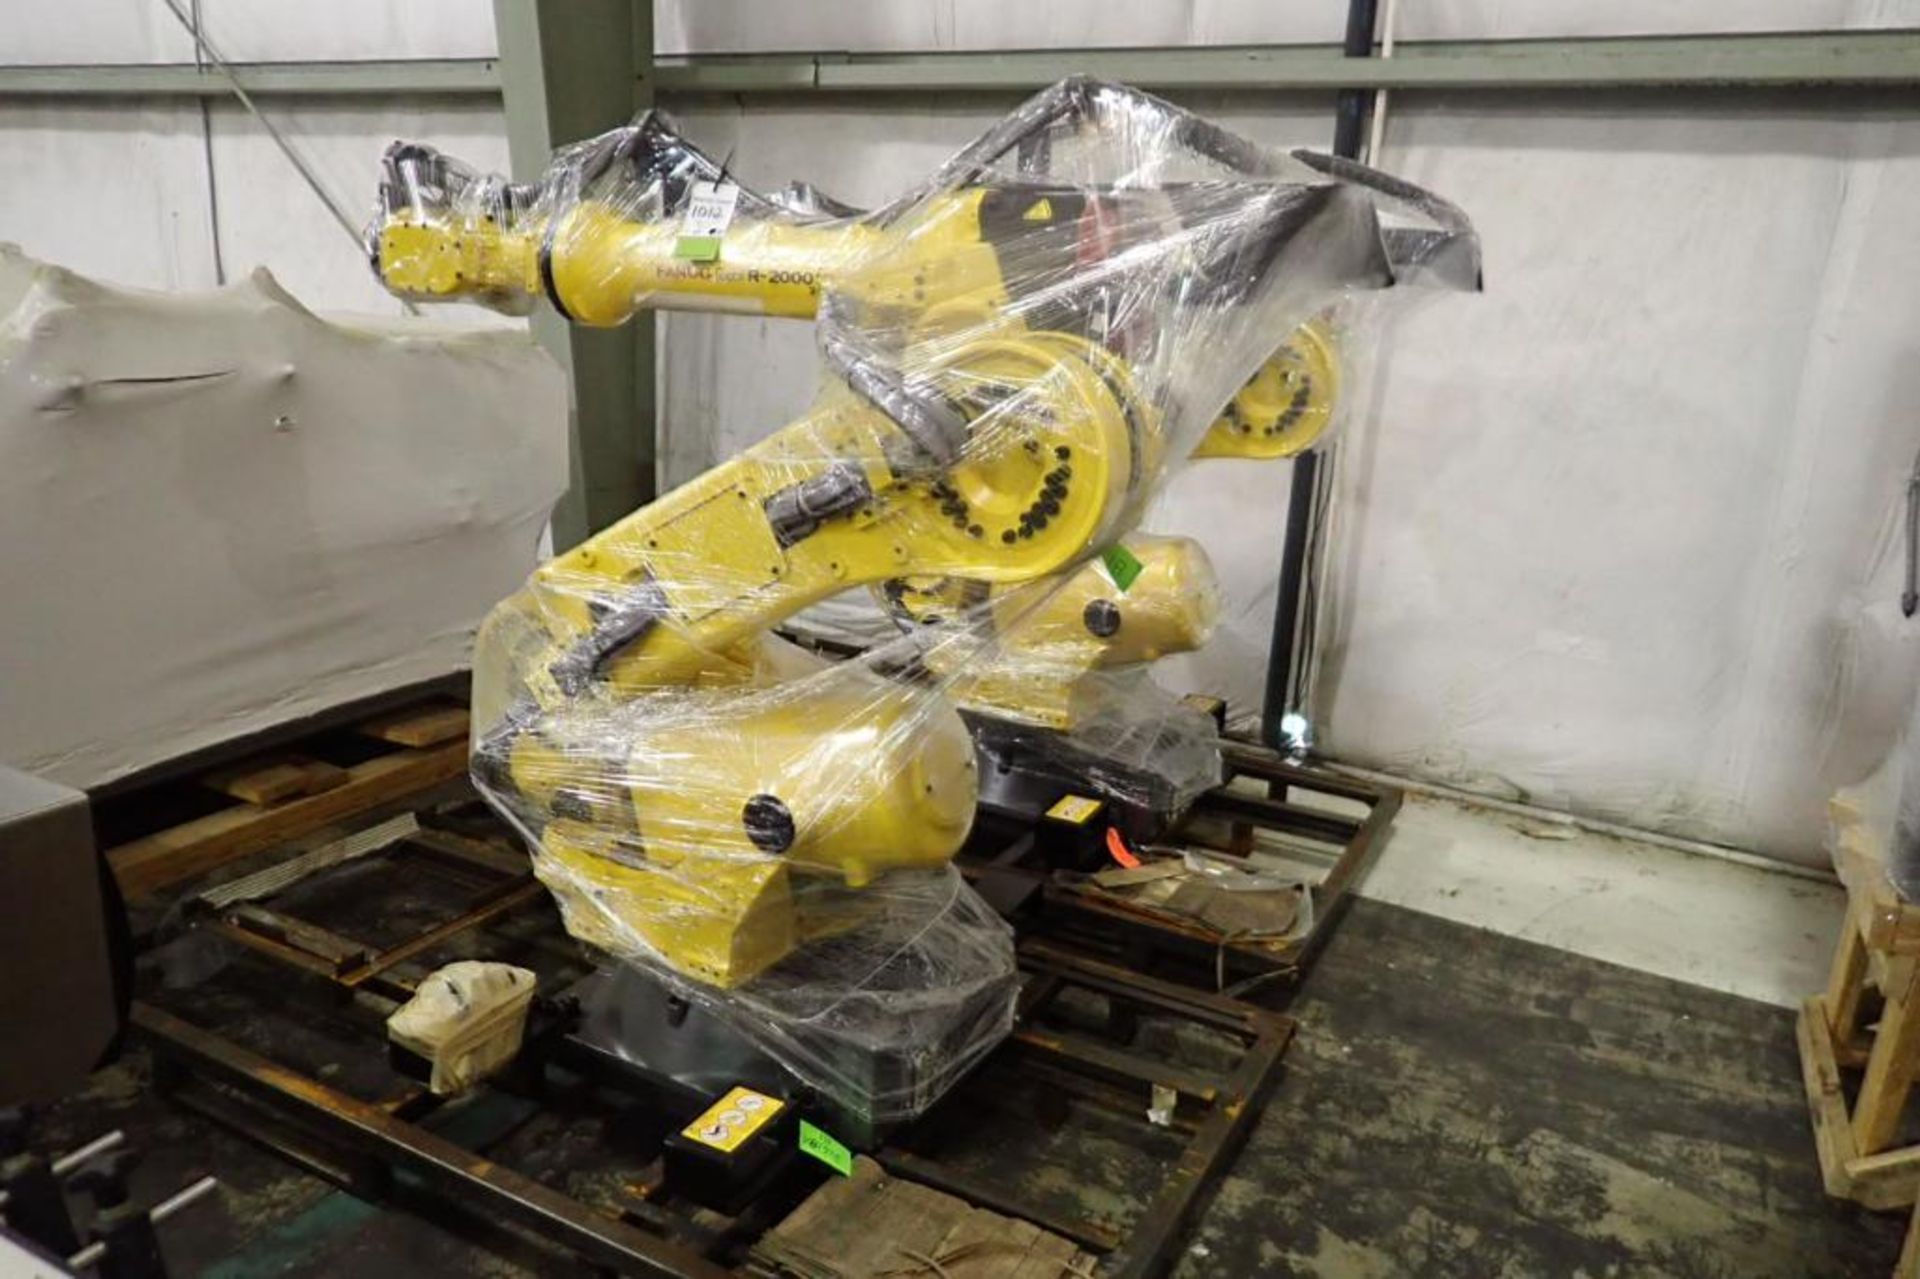 NEW Fanuc robot depalletizing system, Robot R-2000iC210F robot arm with pedestal, control panel, inf